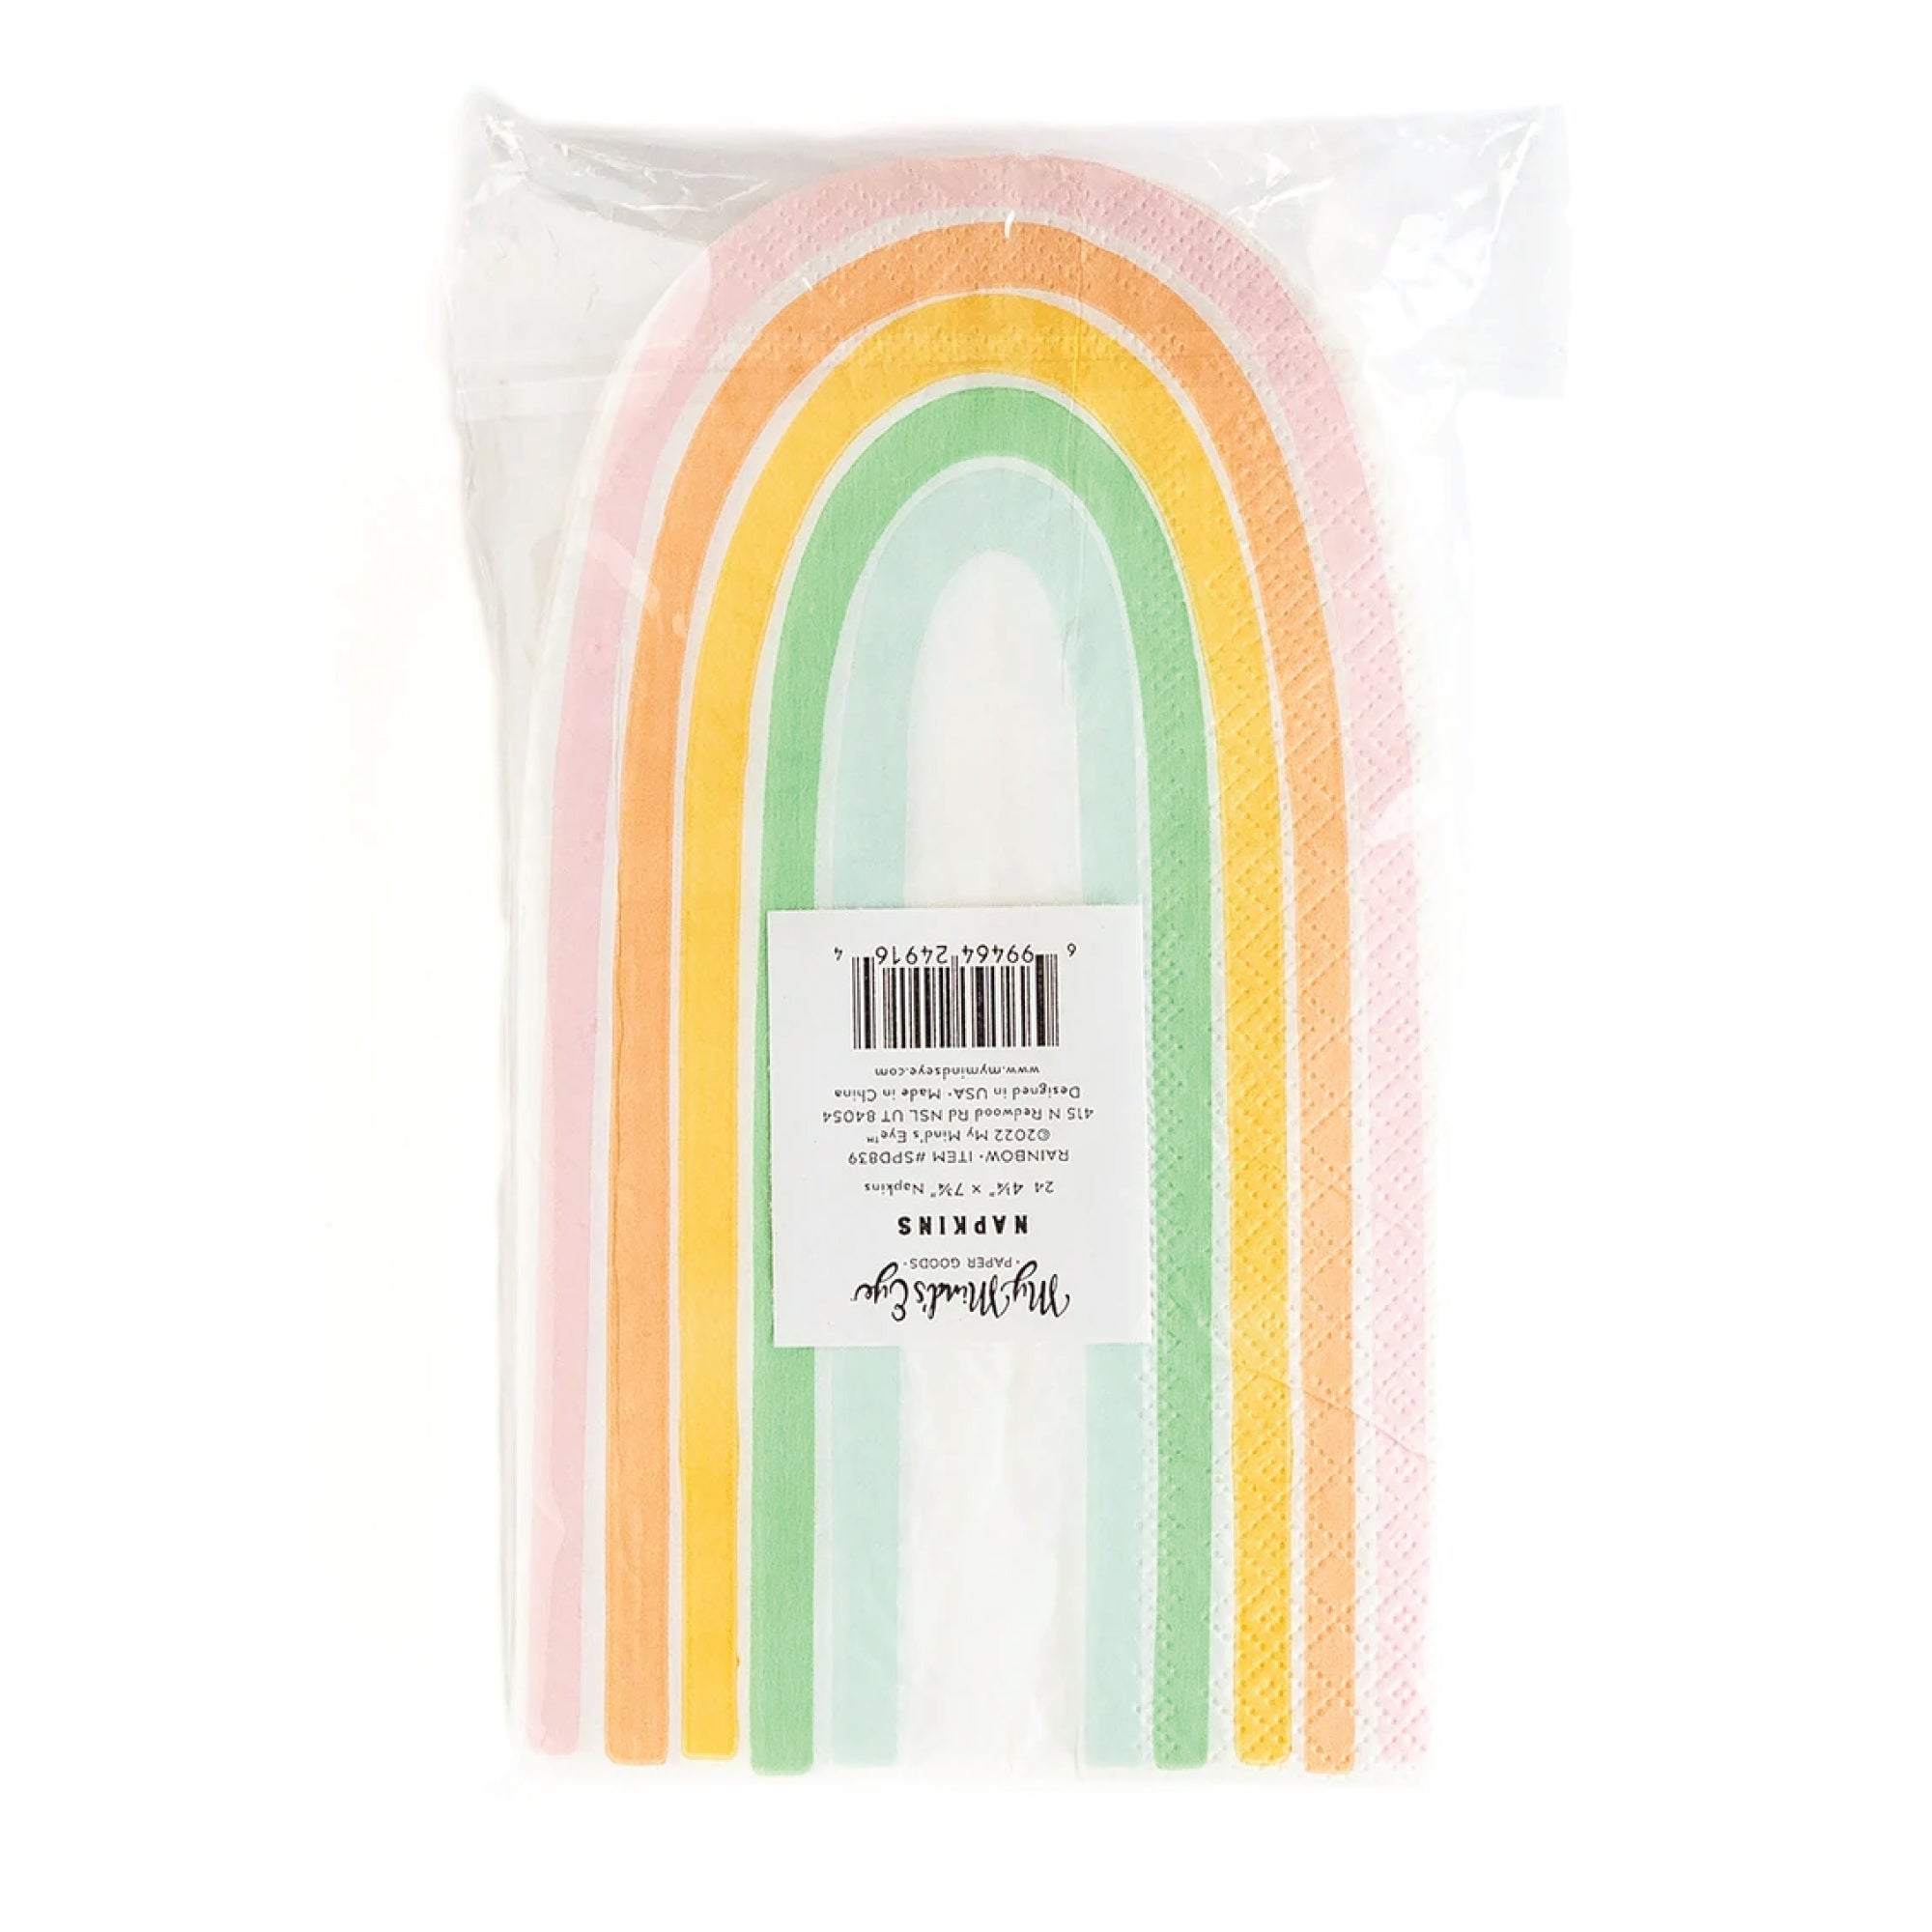 Pastel Rainbow Shaped Lunch Napkins 24ct | The Party Darling